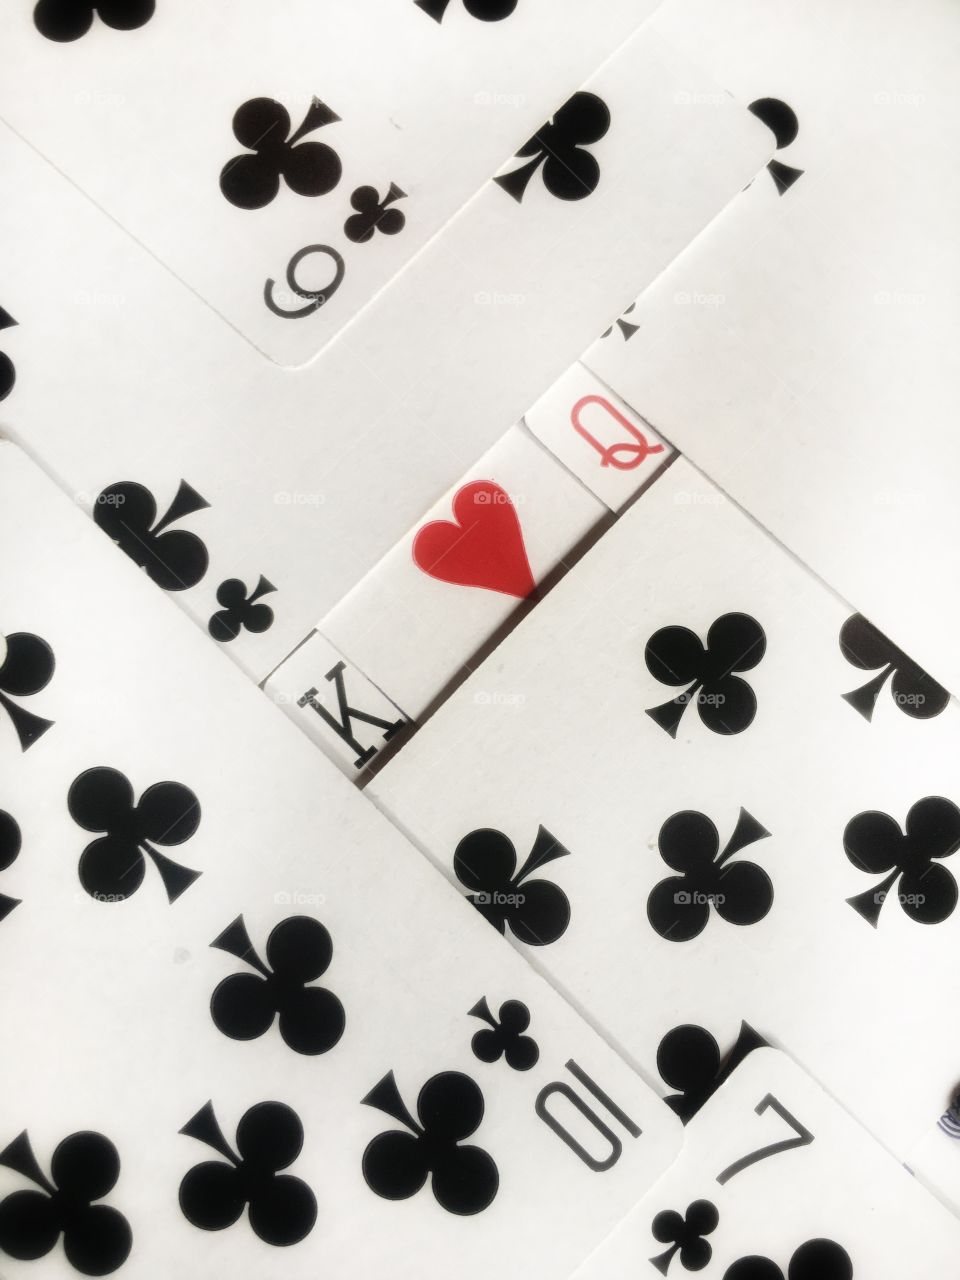 Being creative with playing cards is my favourite hobby.